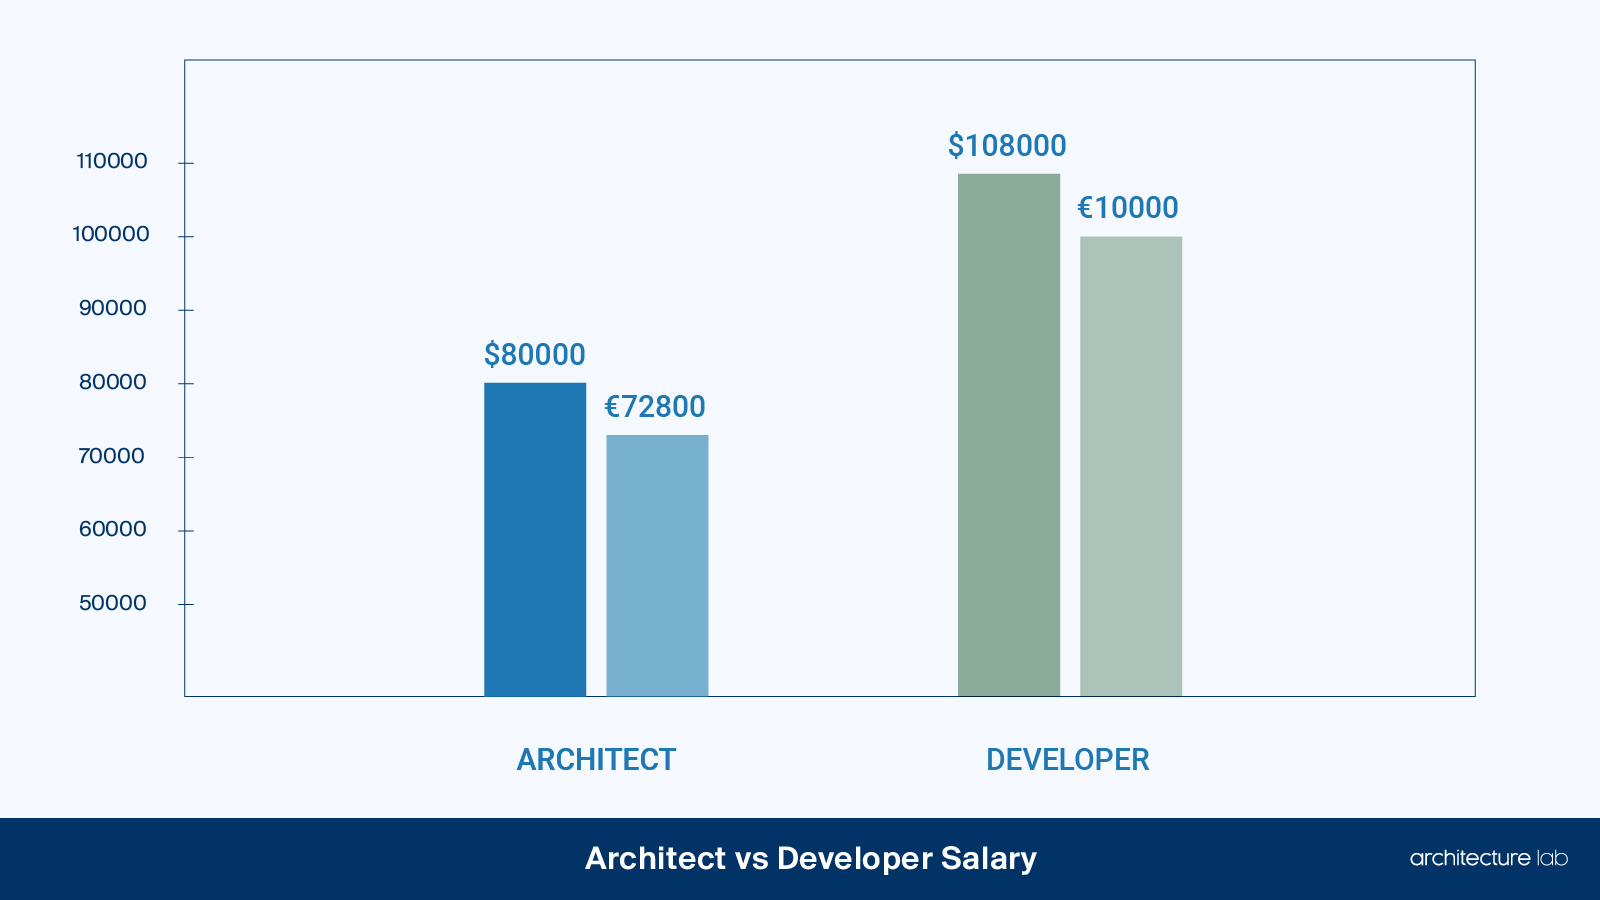 Architects vs construction developers: differences, similarities, duties, salaries, and education